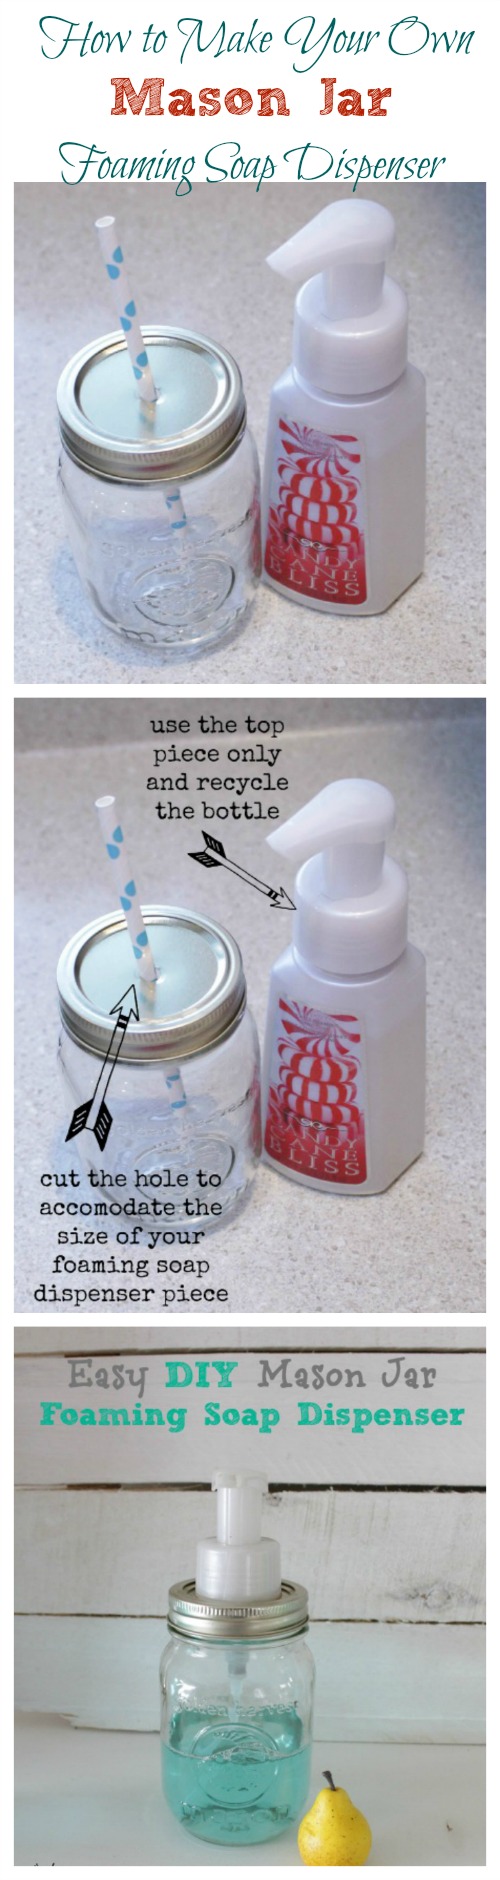 How to Make Your Own Mason Jar Foaming Soap Dispenser poster.